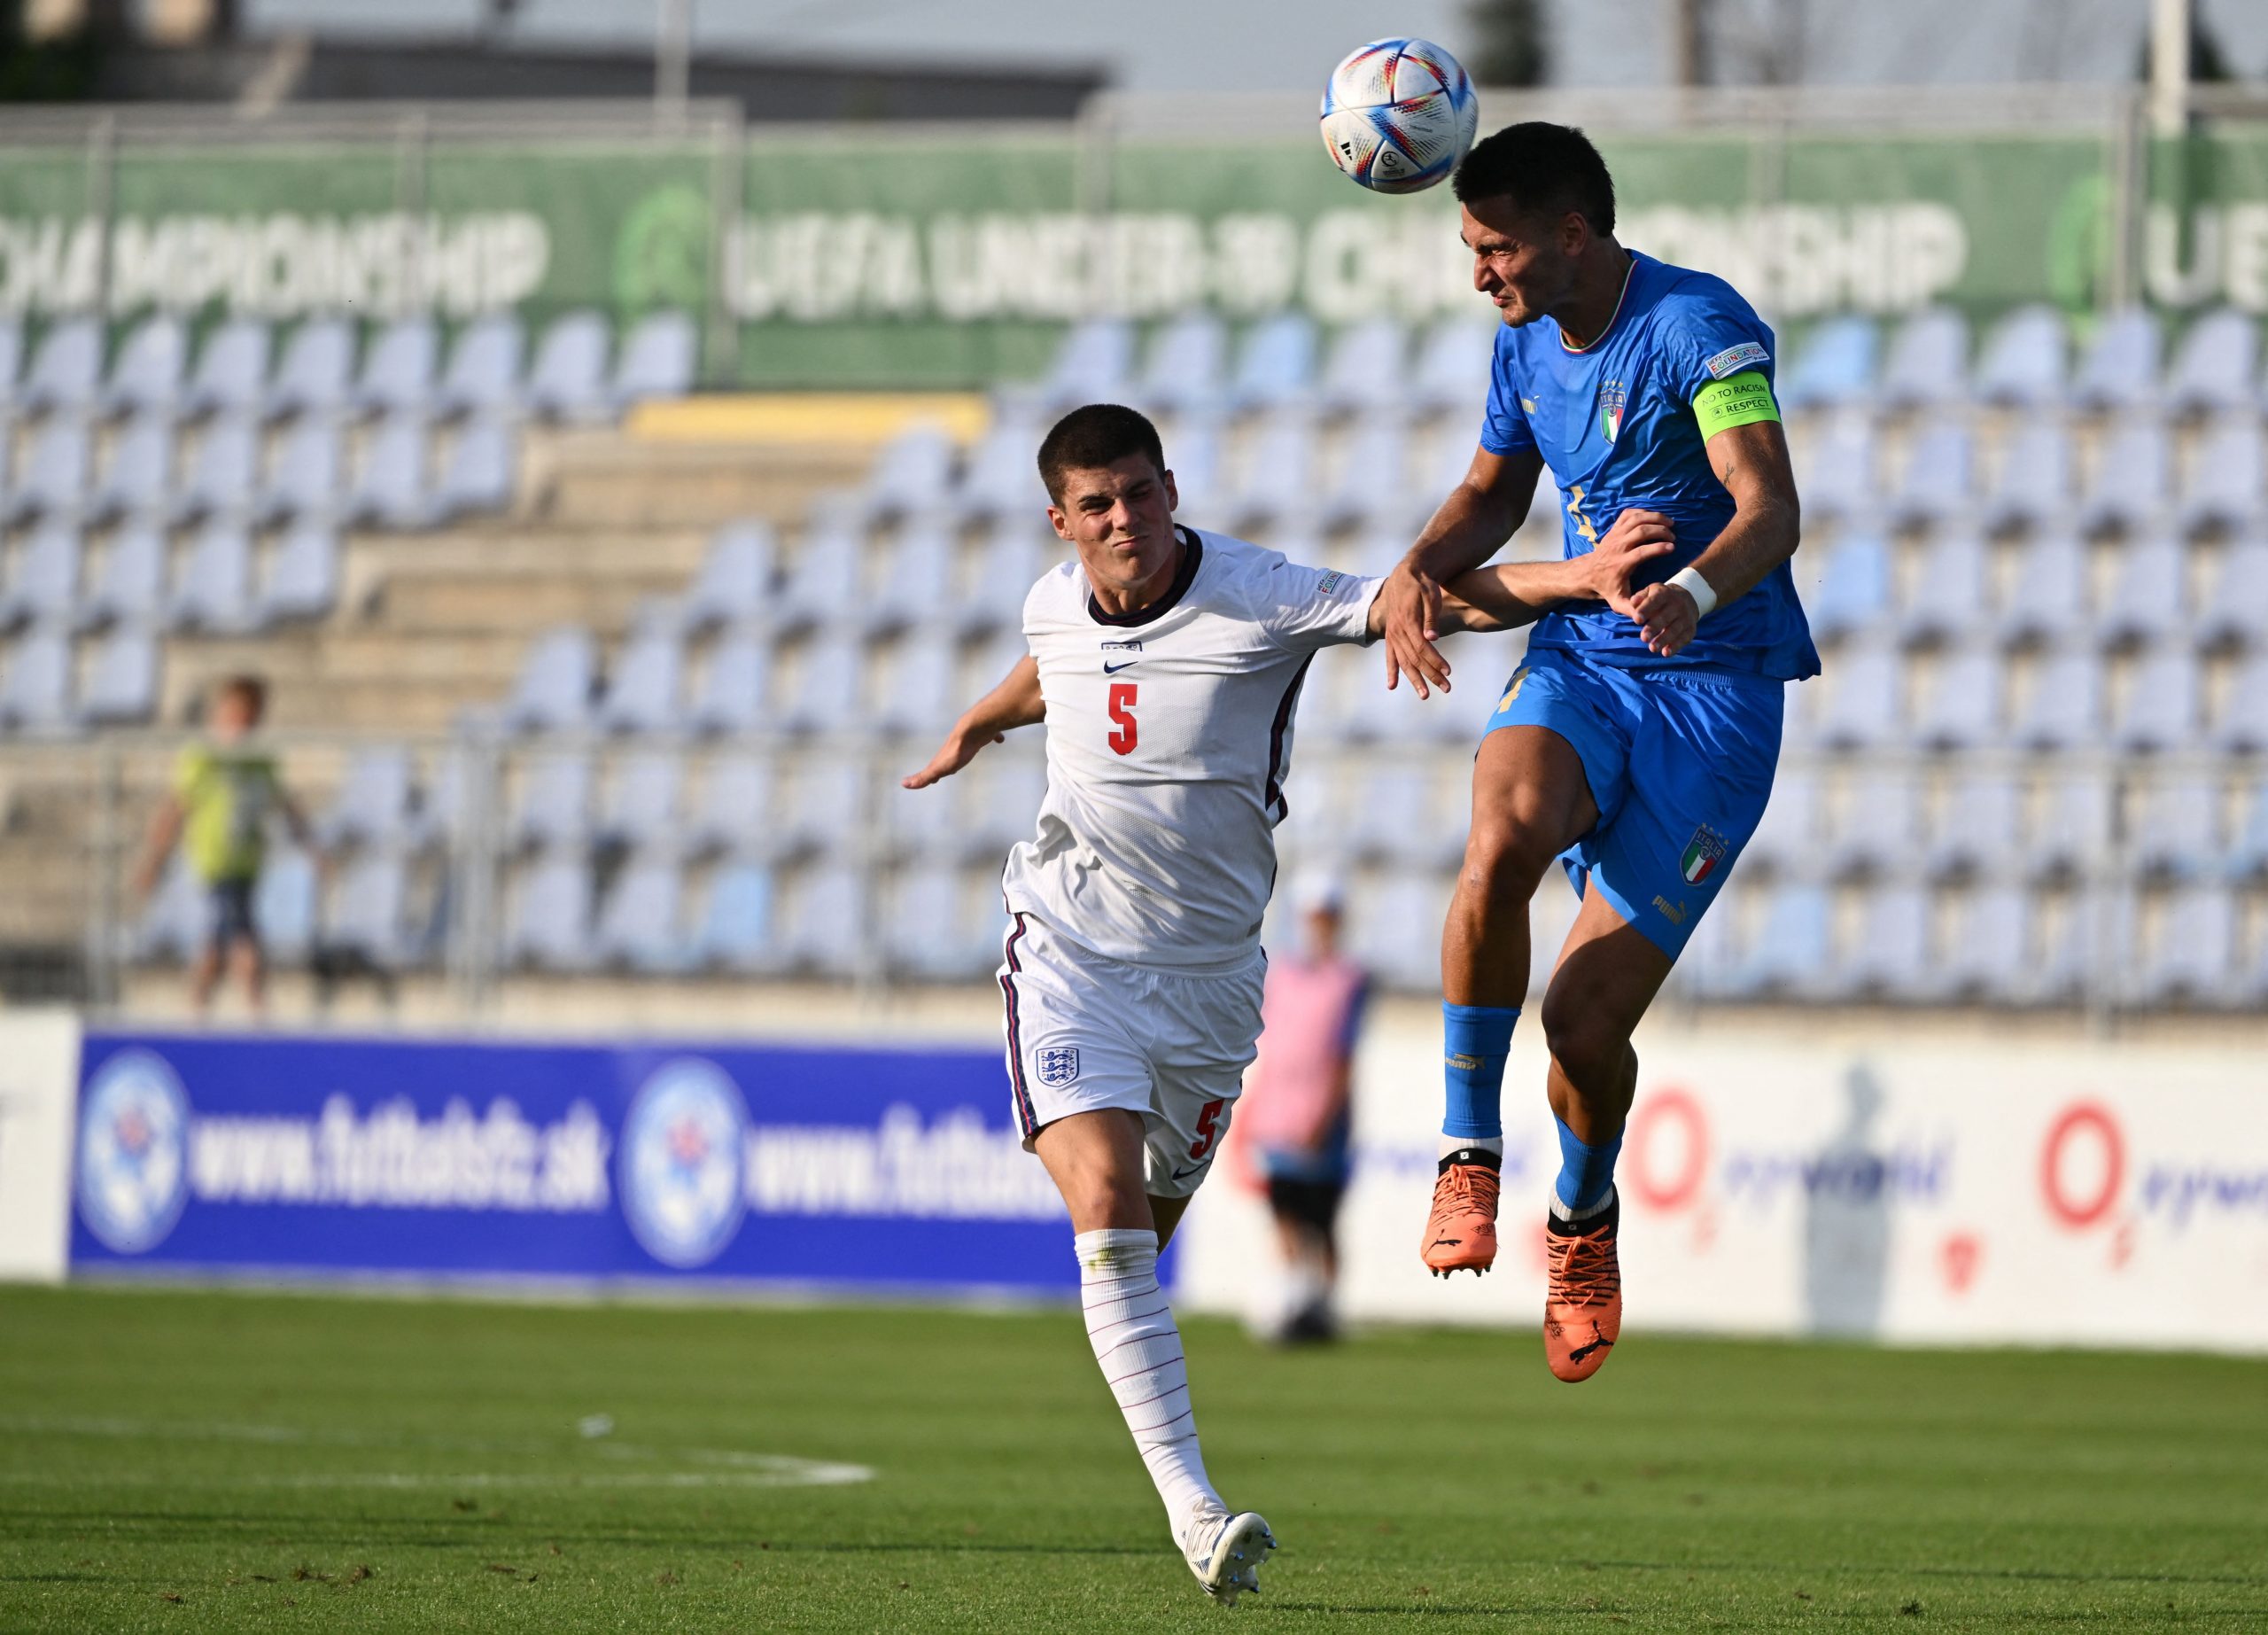 Italy's defender Diego Coppola (R) and England's defender Ronnie Edwards vie during the UEFA Under-19 European Championship semi-final.